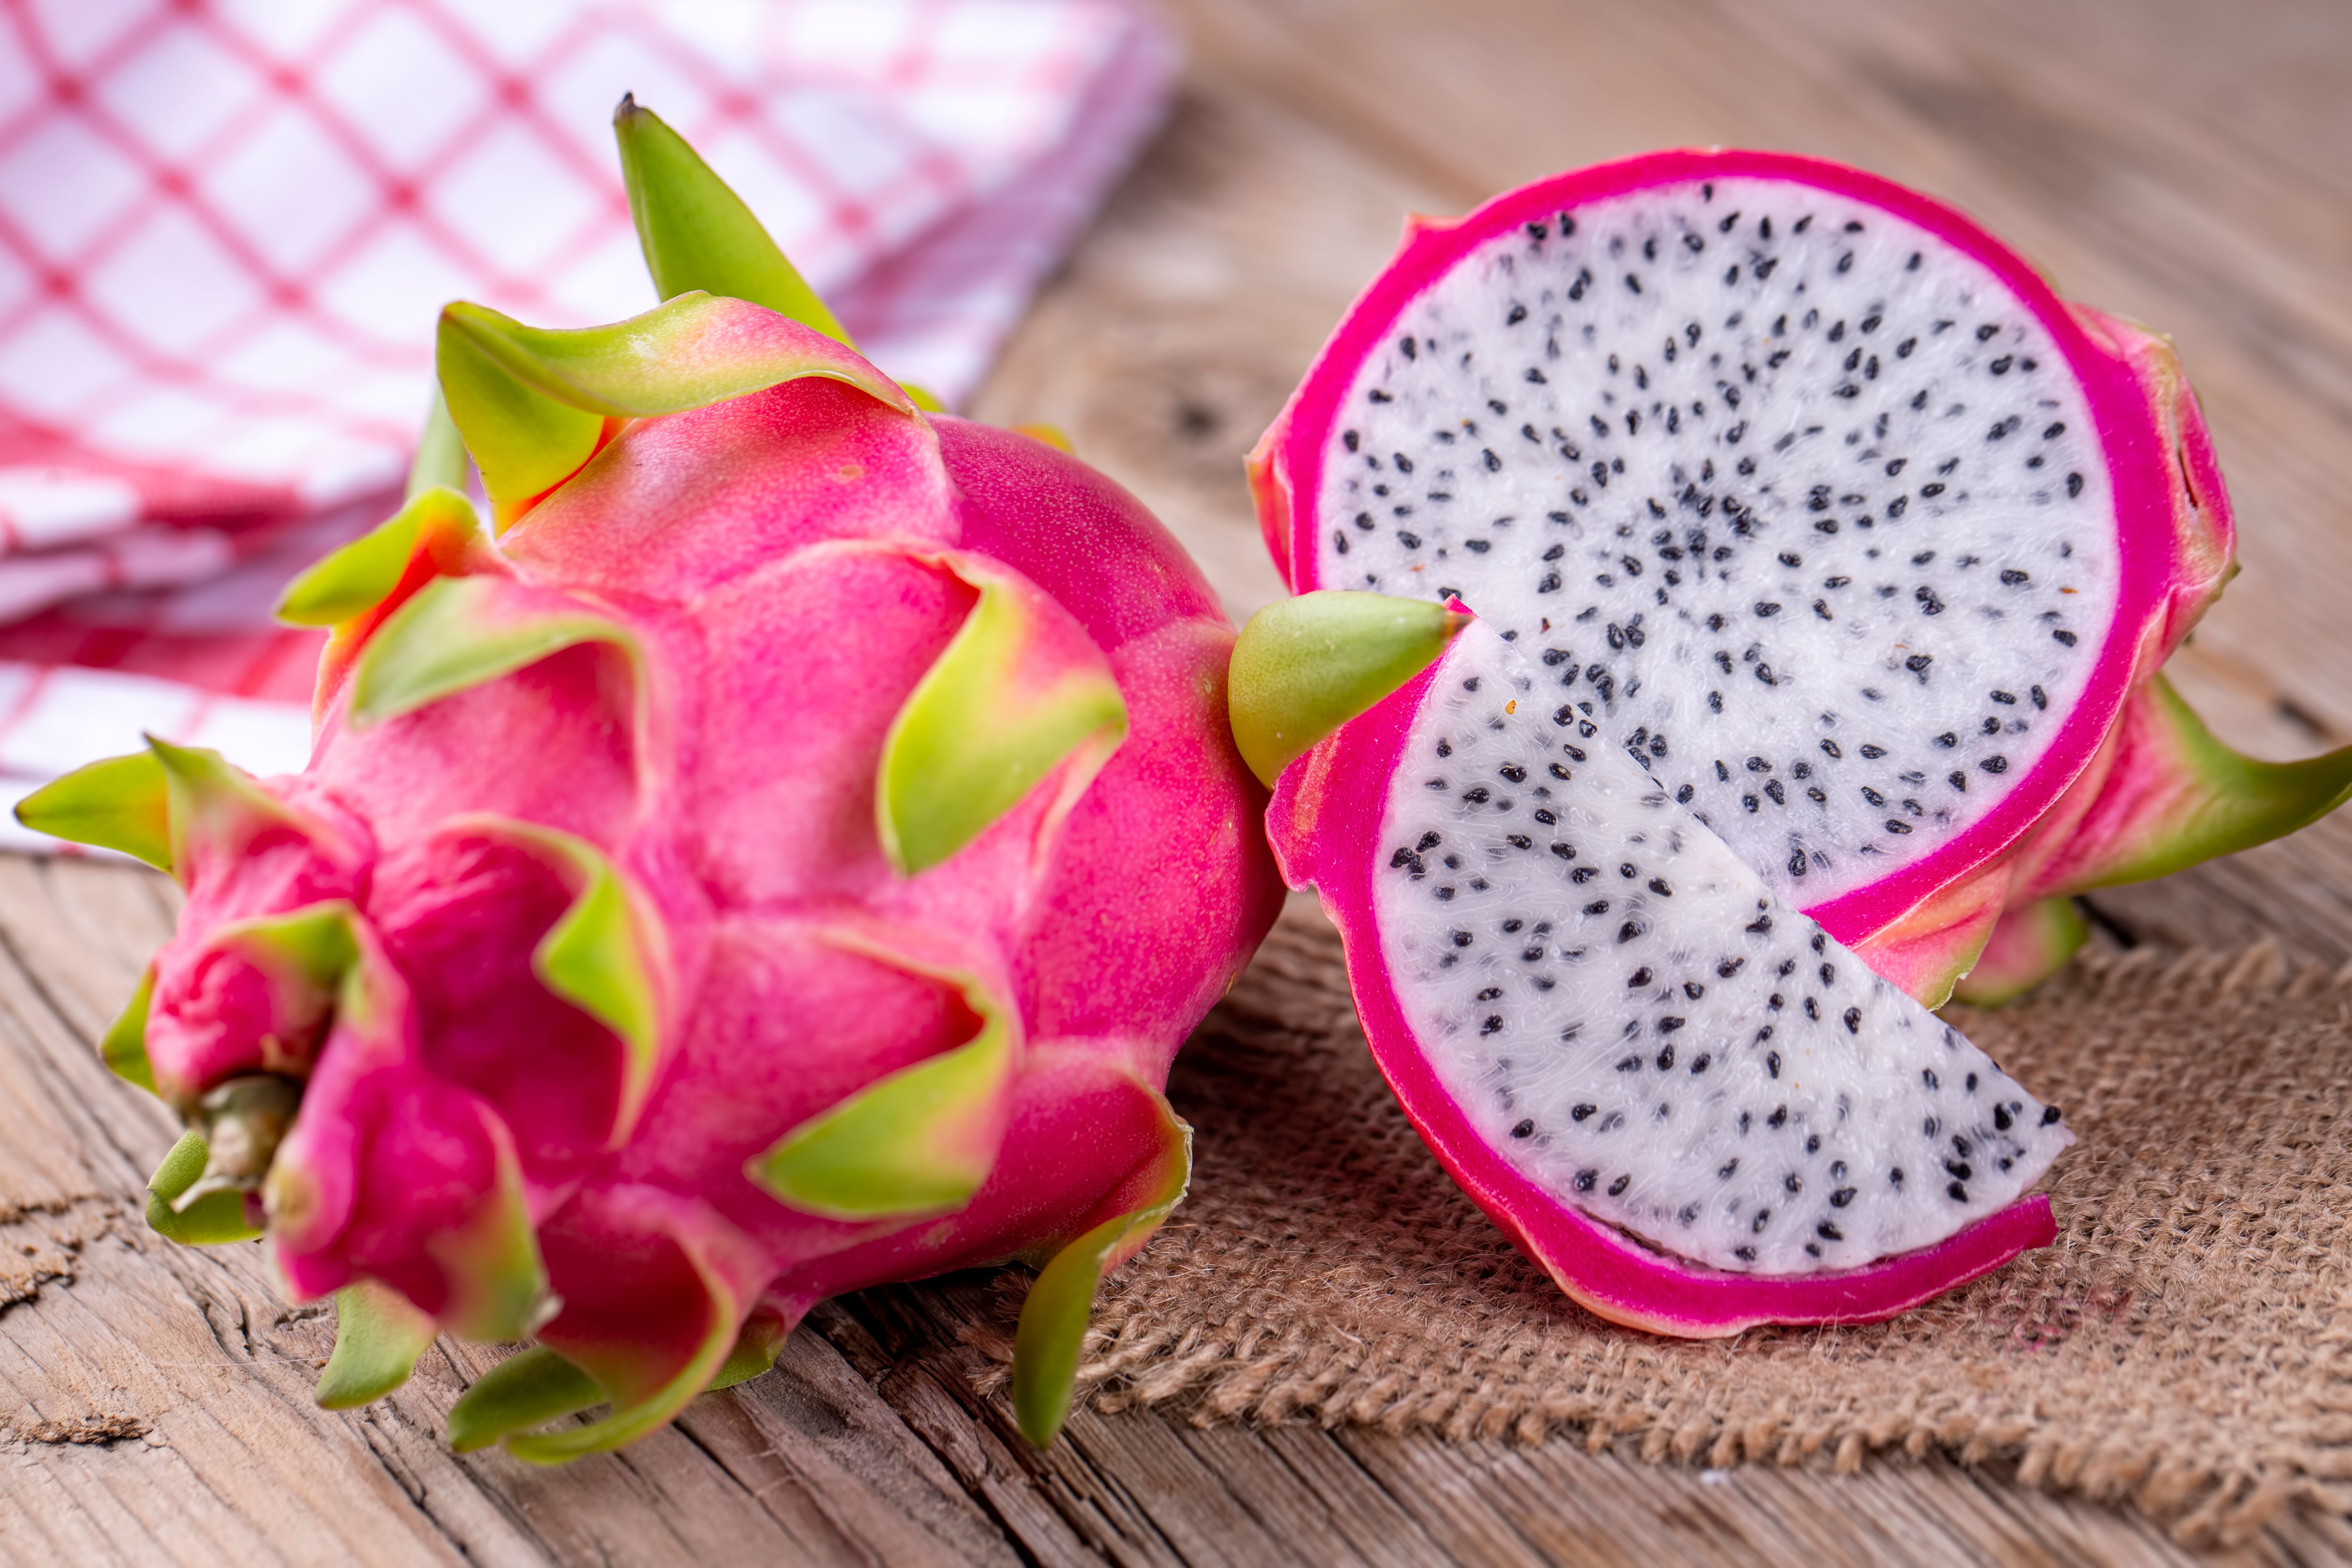 Is dragon fruit easy to grow